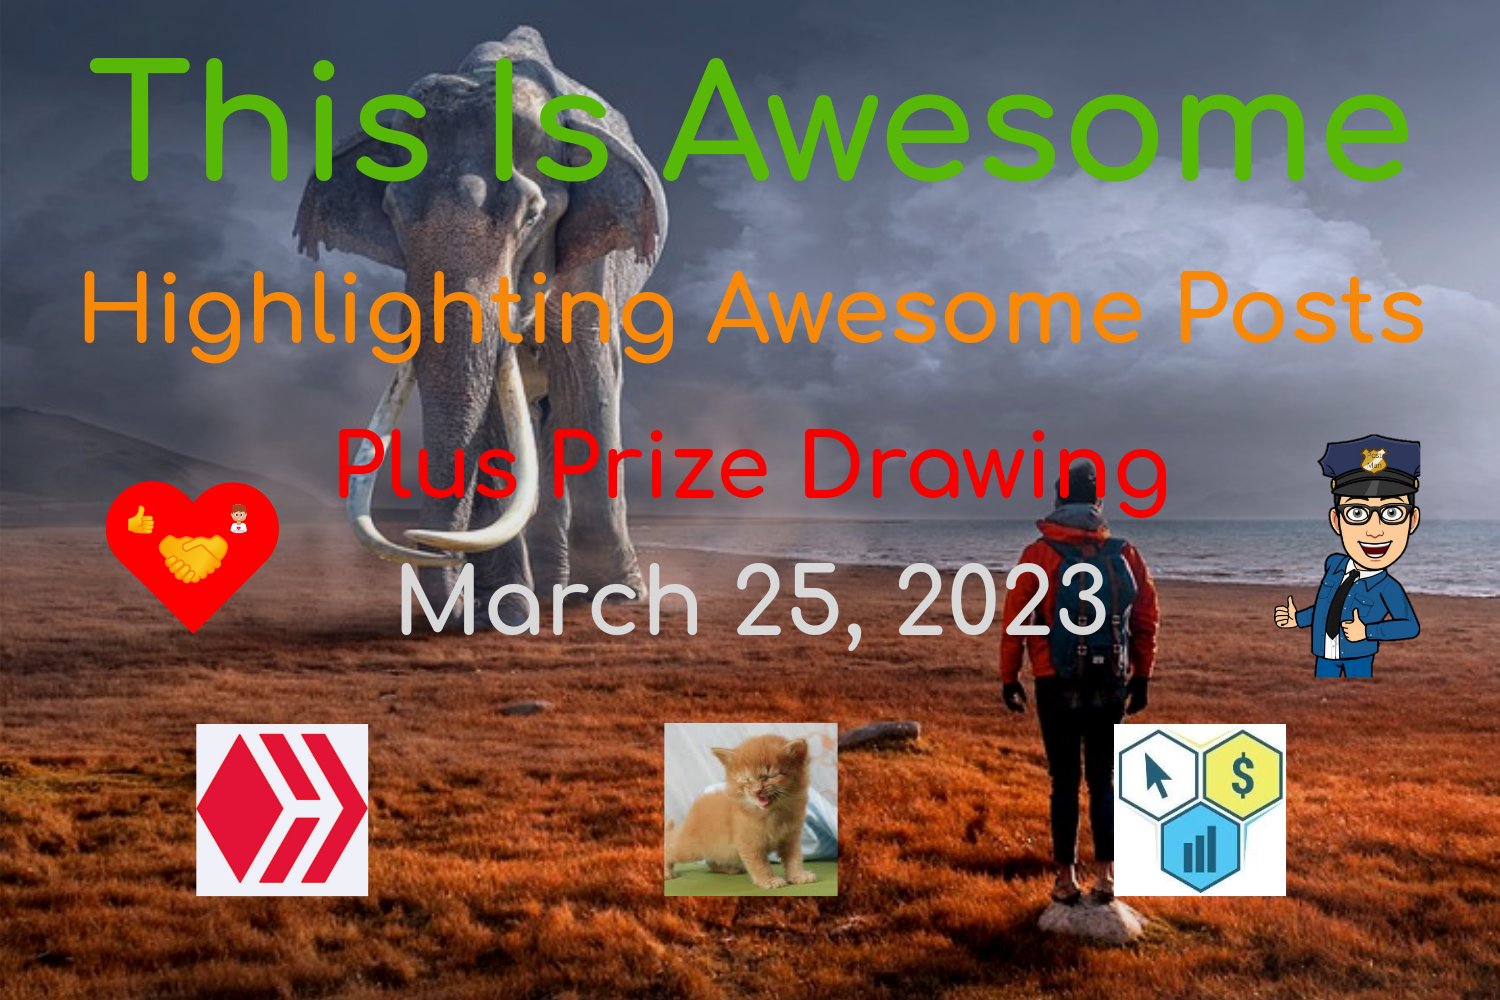 @thisisawesome/this-is-awesome-highlighting-awesome-posts-plus-prize-drawing-march-25-2023